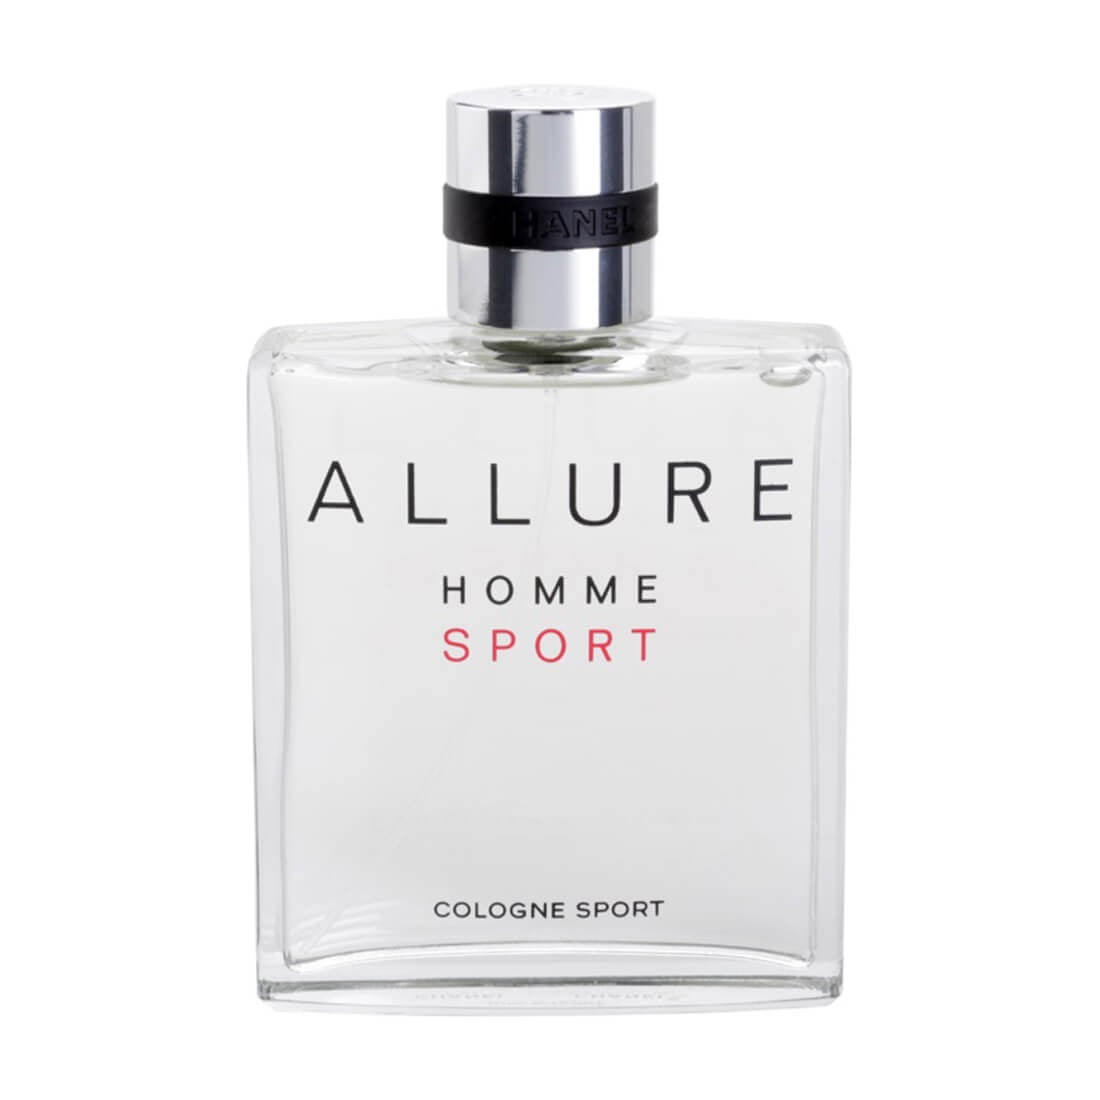 Chanel Bleu de Chanel EDT and Allure Sport Extreme India